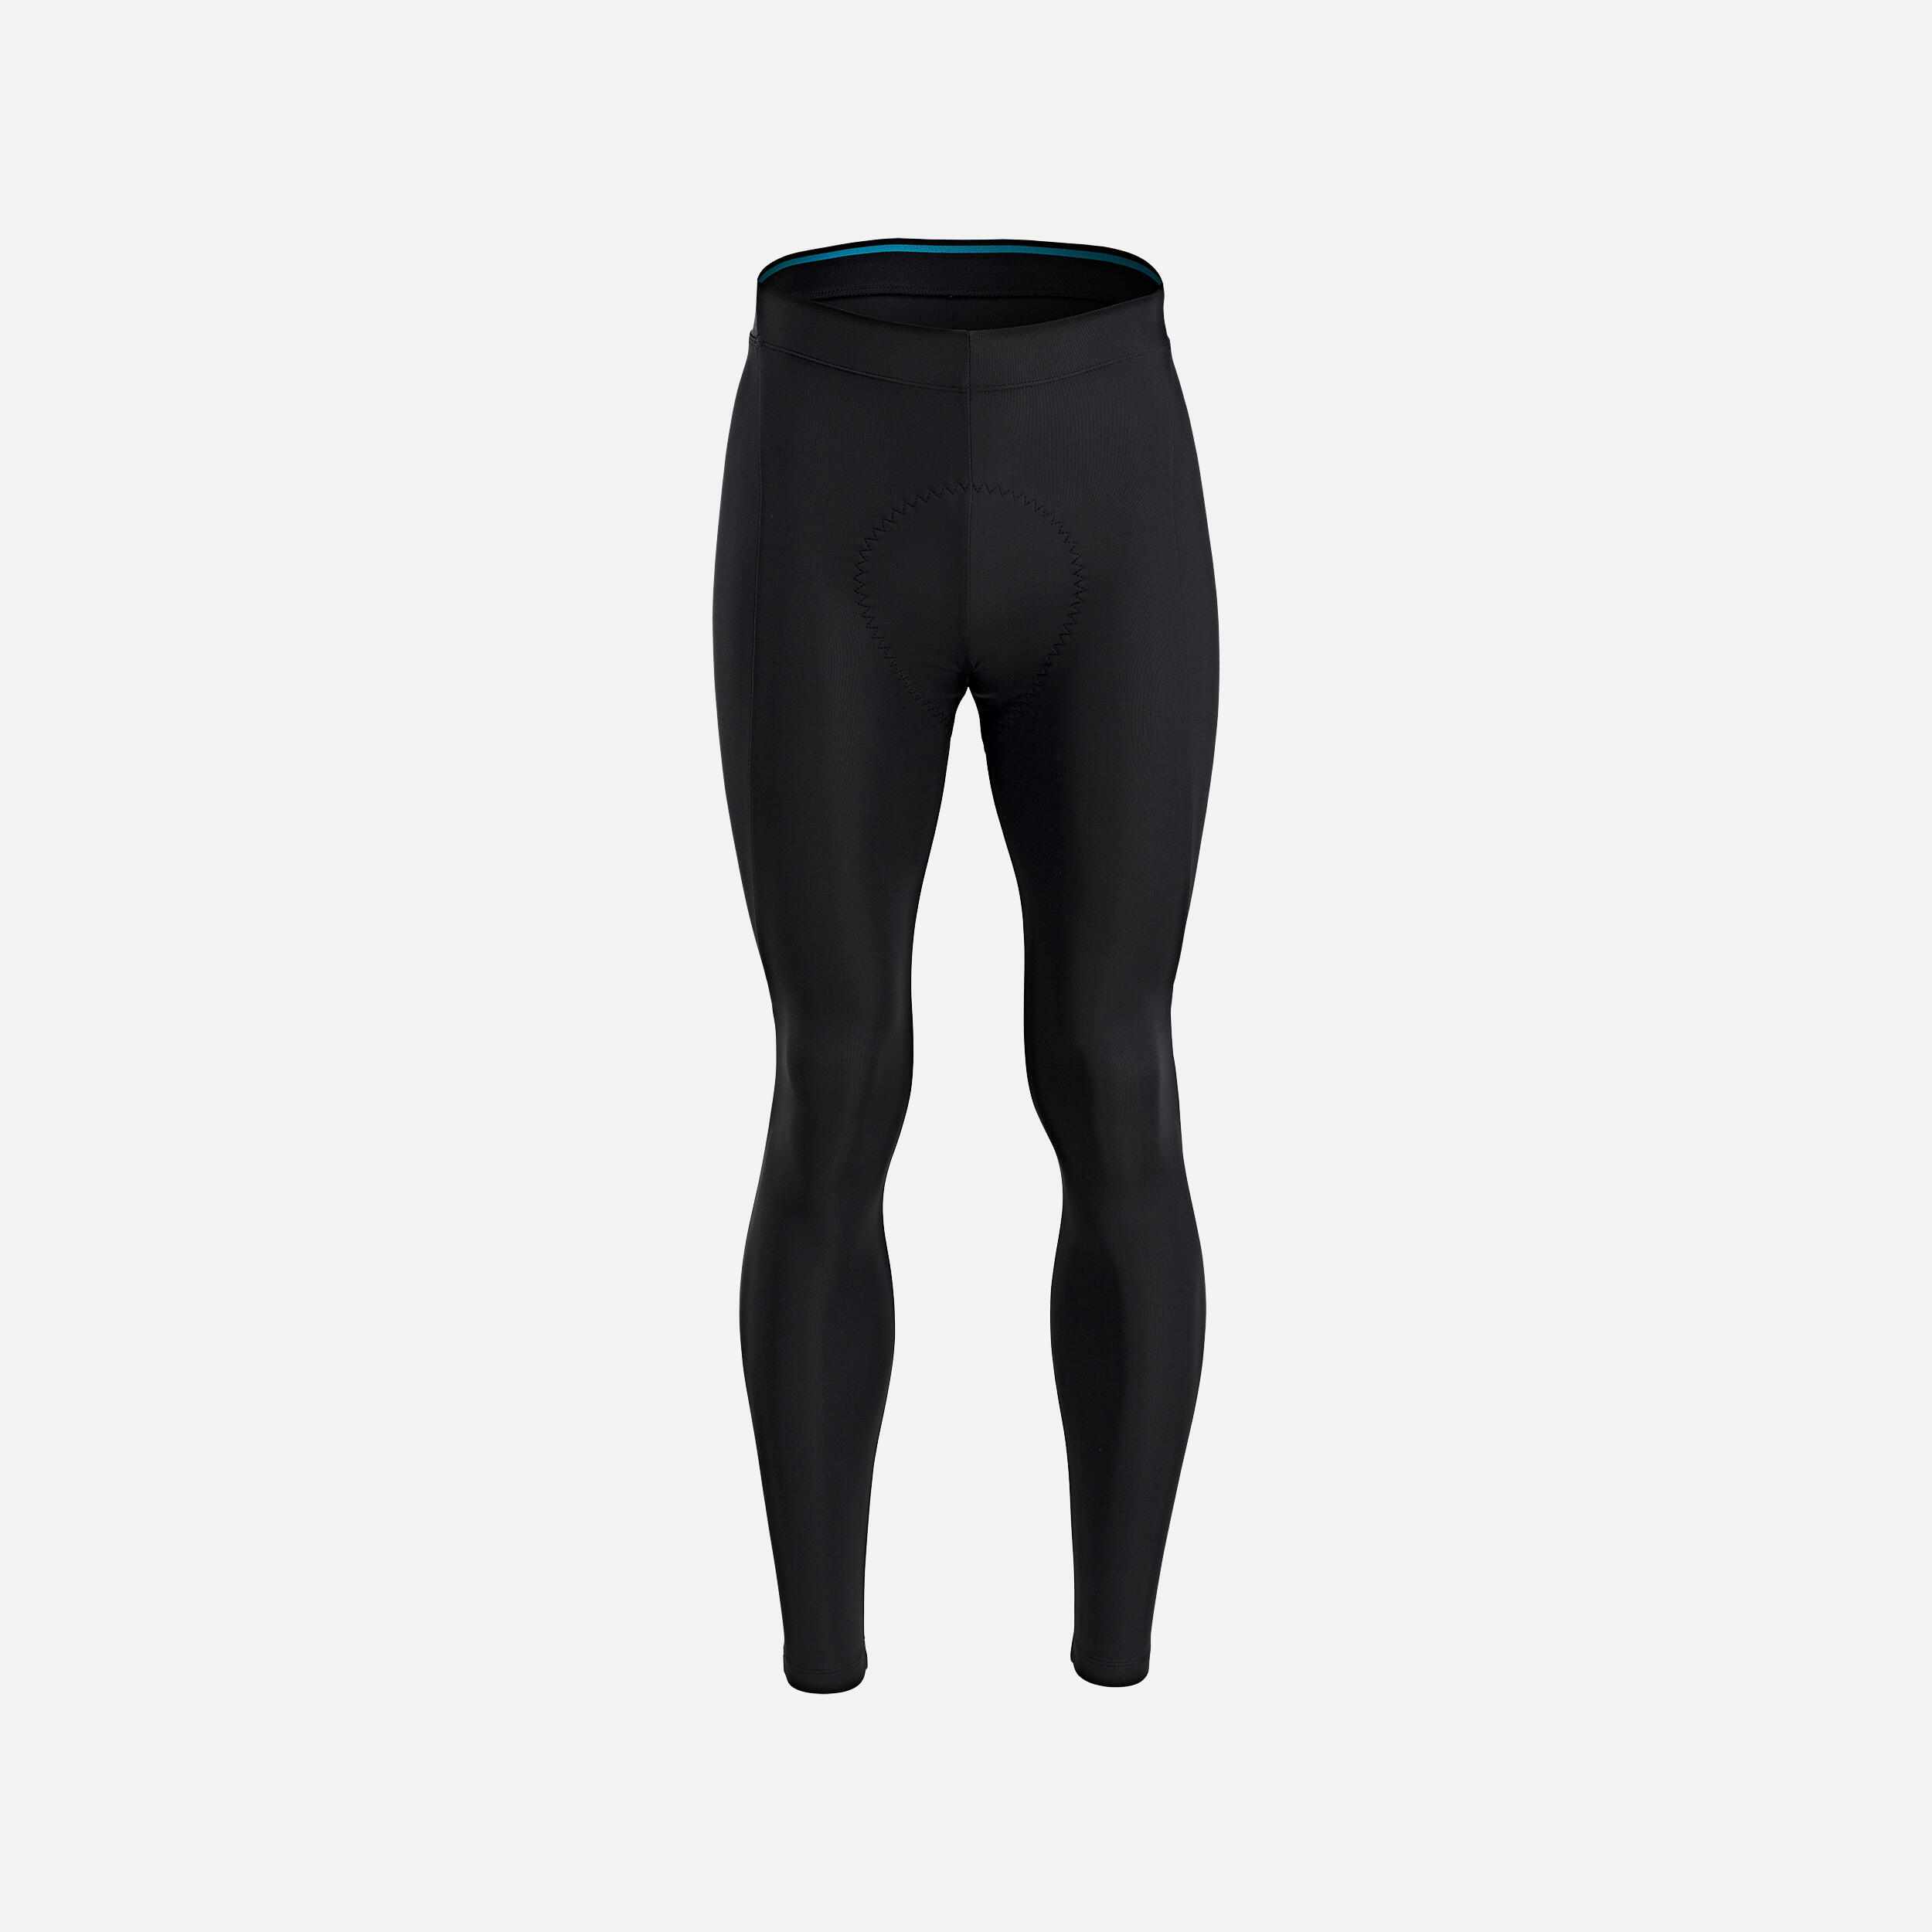 Men's Spring / Autumn Cycling Tights RC100 1/5